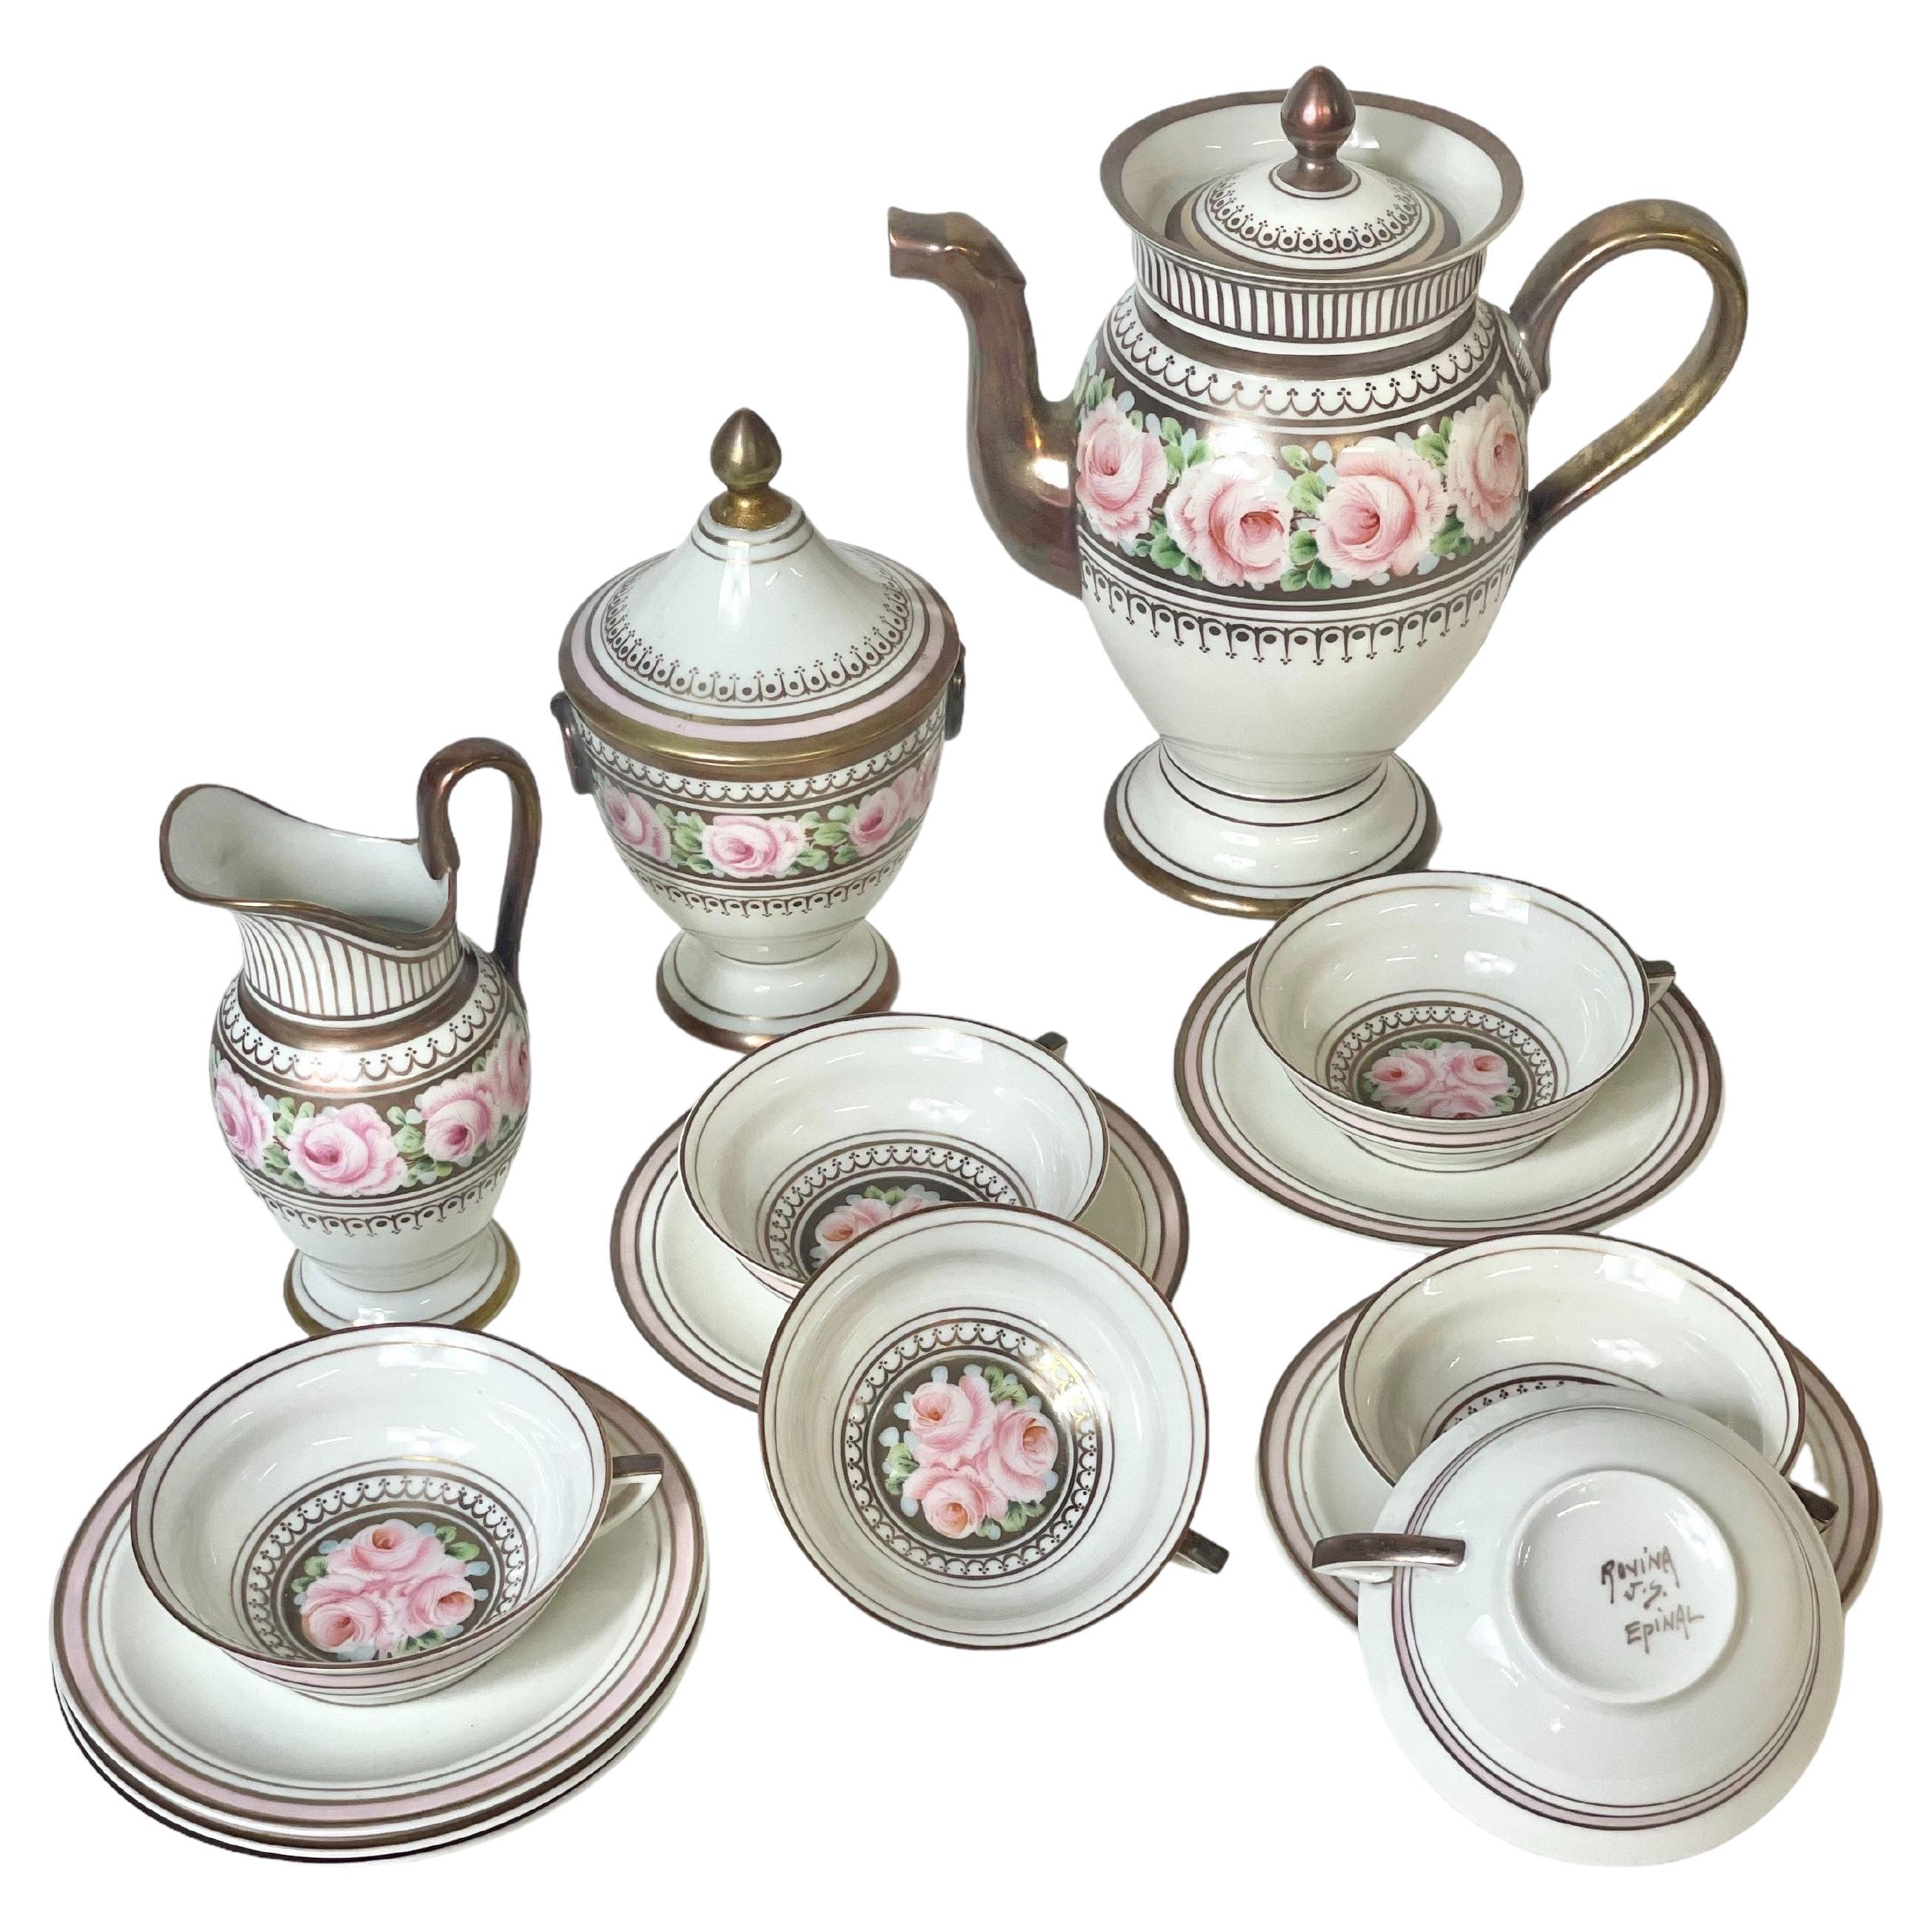 French Vintage Empire Style Porcelain Coffee Service with a decor of Flowers For Sale